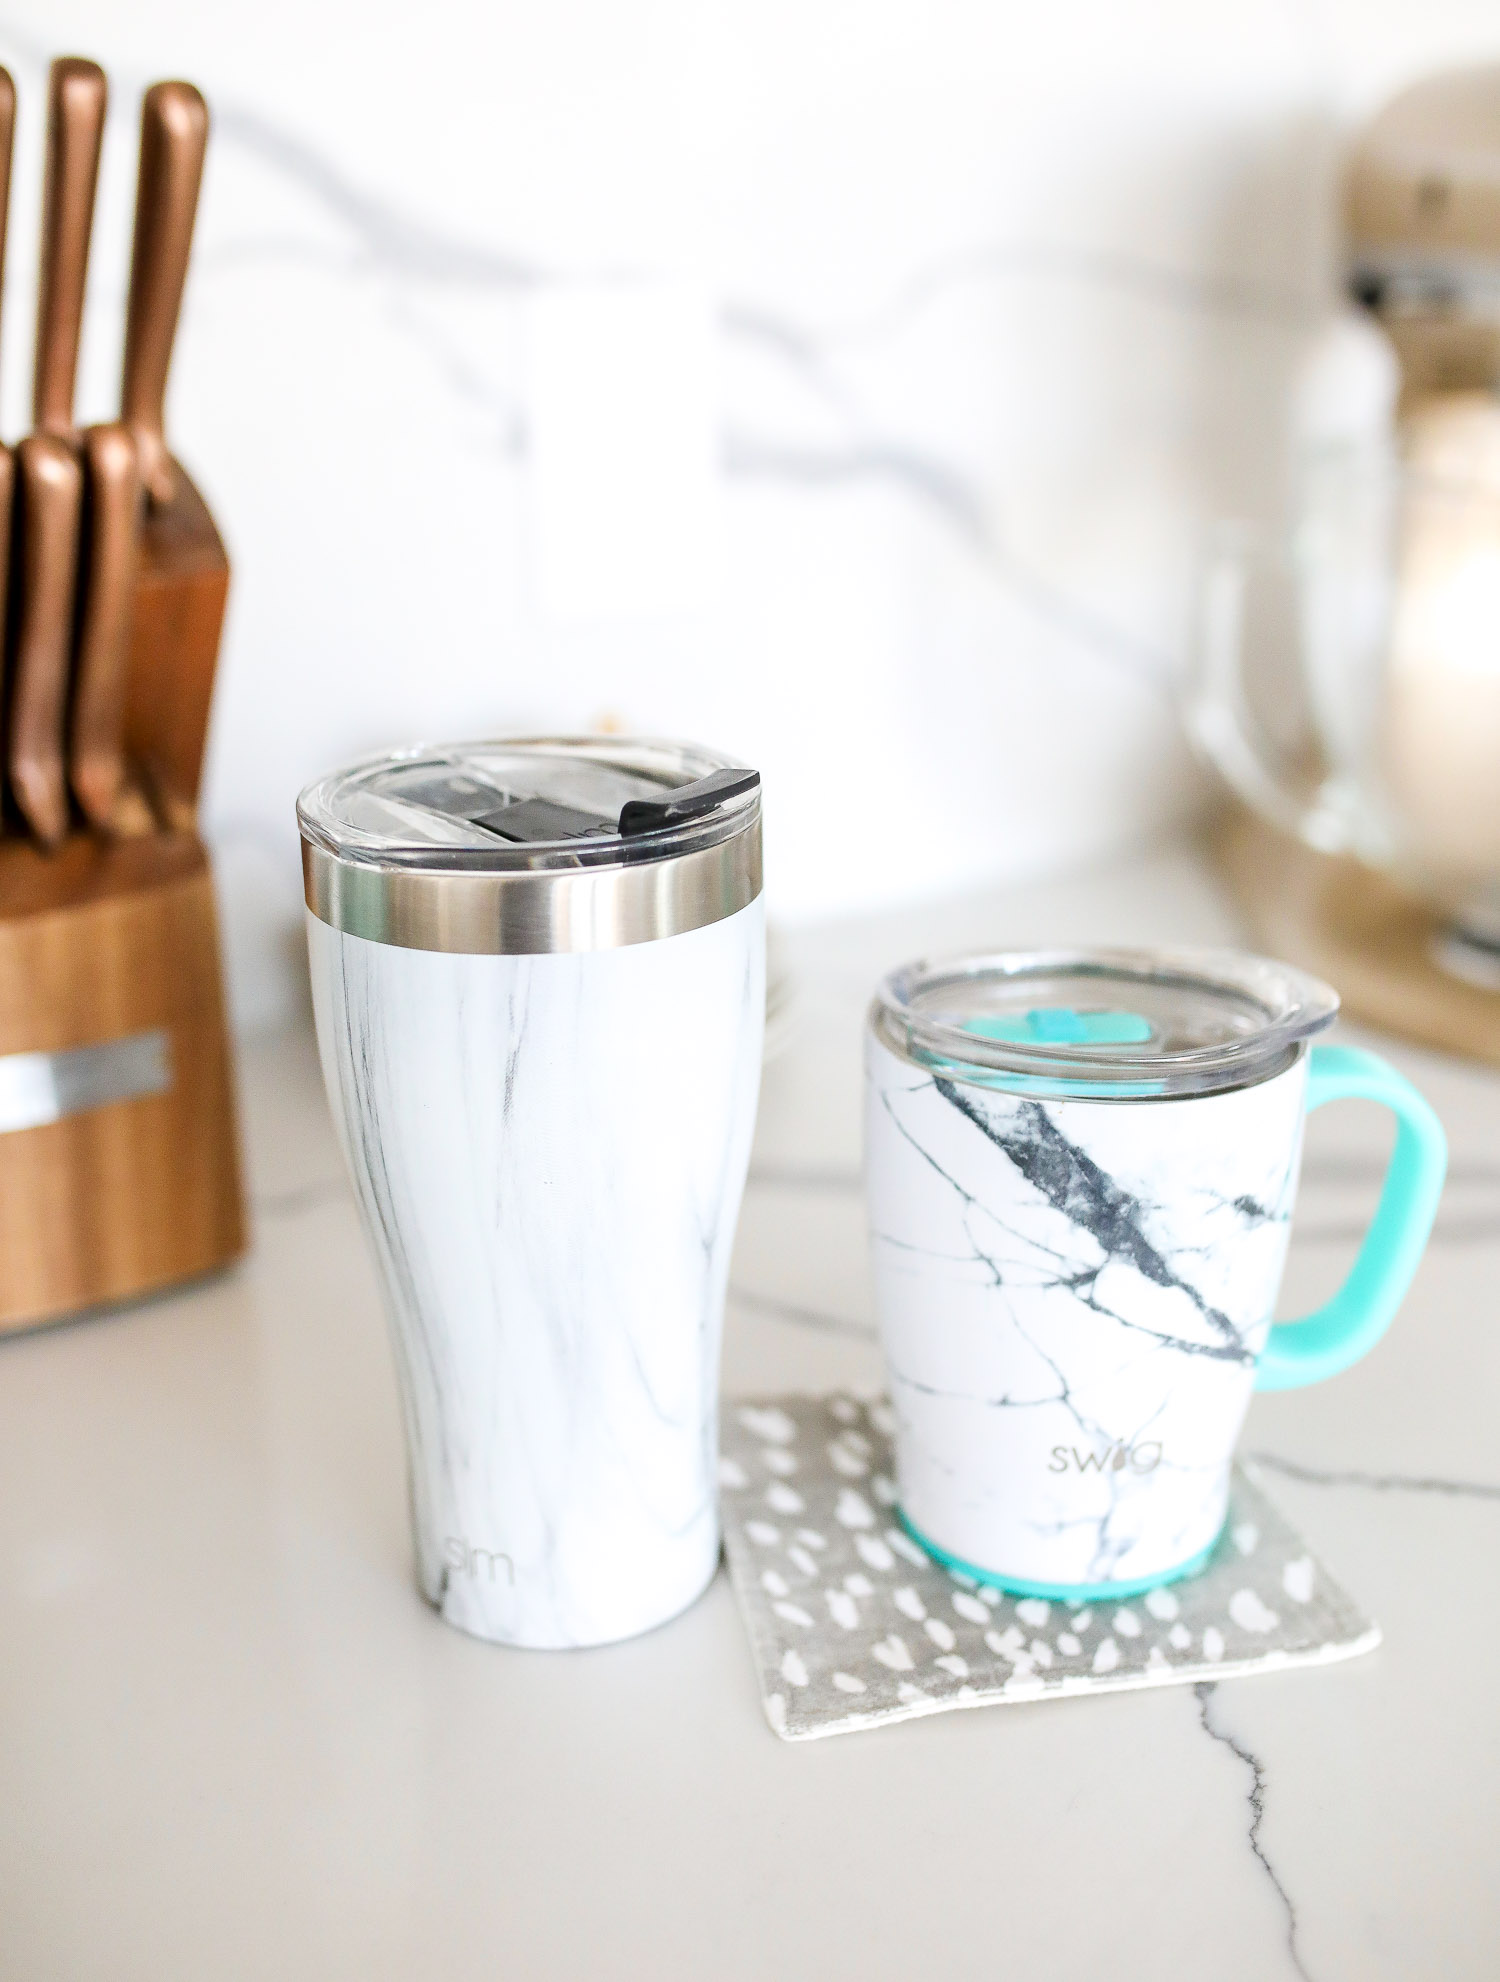 swig marble cup insulated, top amazon must haves, amazon best buys 2020, emily gemma, amazon prime must haves blog post,_-4 | Amazon Prime Favorites by popular US life and style blog, The Sweetest Thing: image of Amazon Prime Swig travel thermos and mug. 